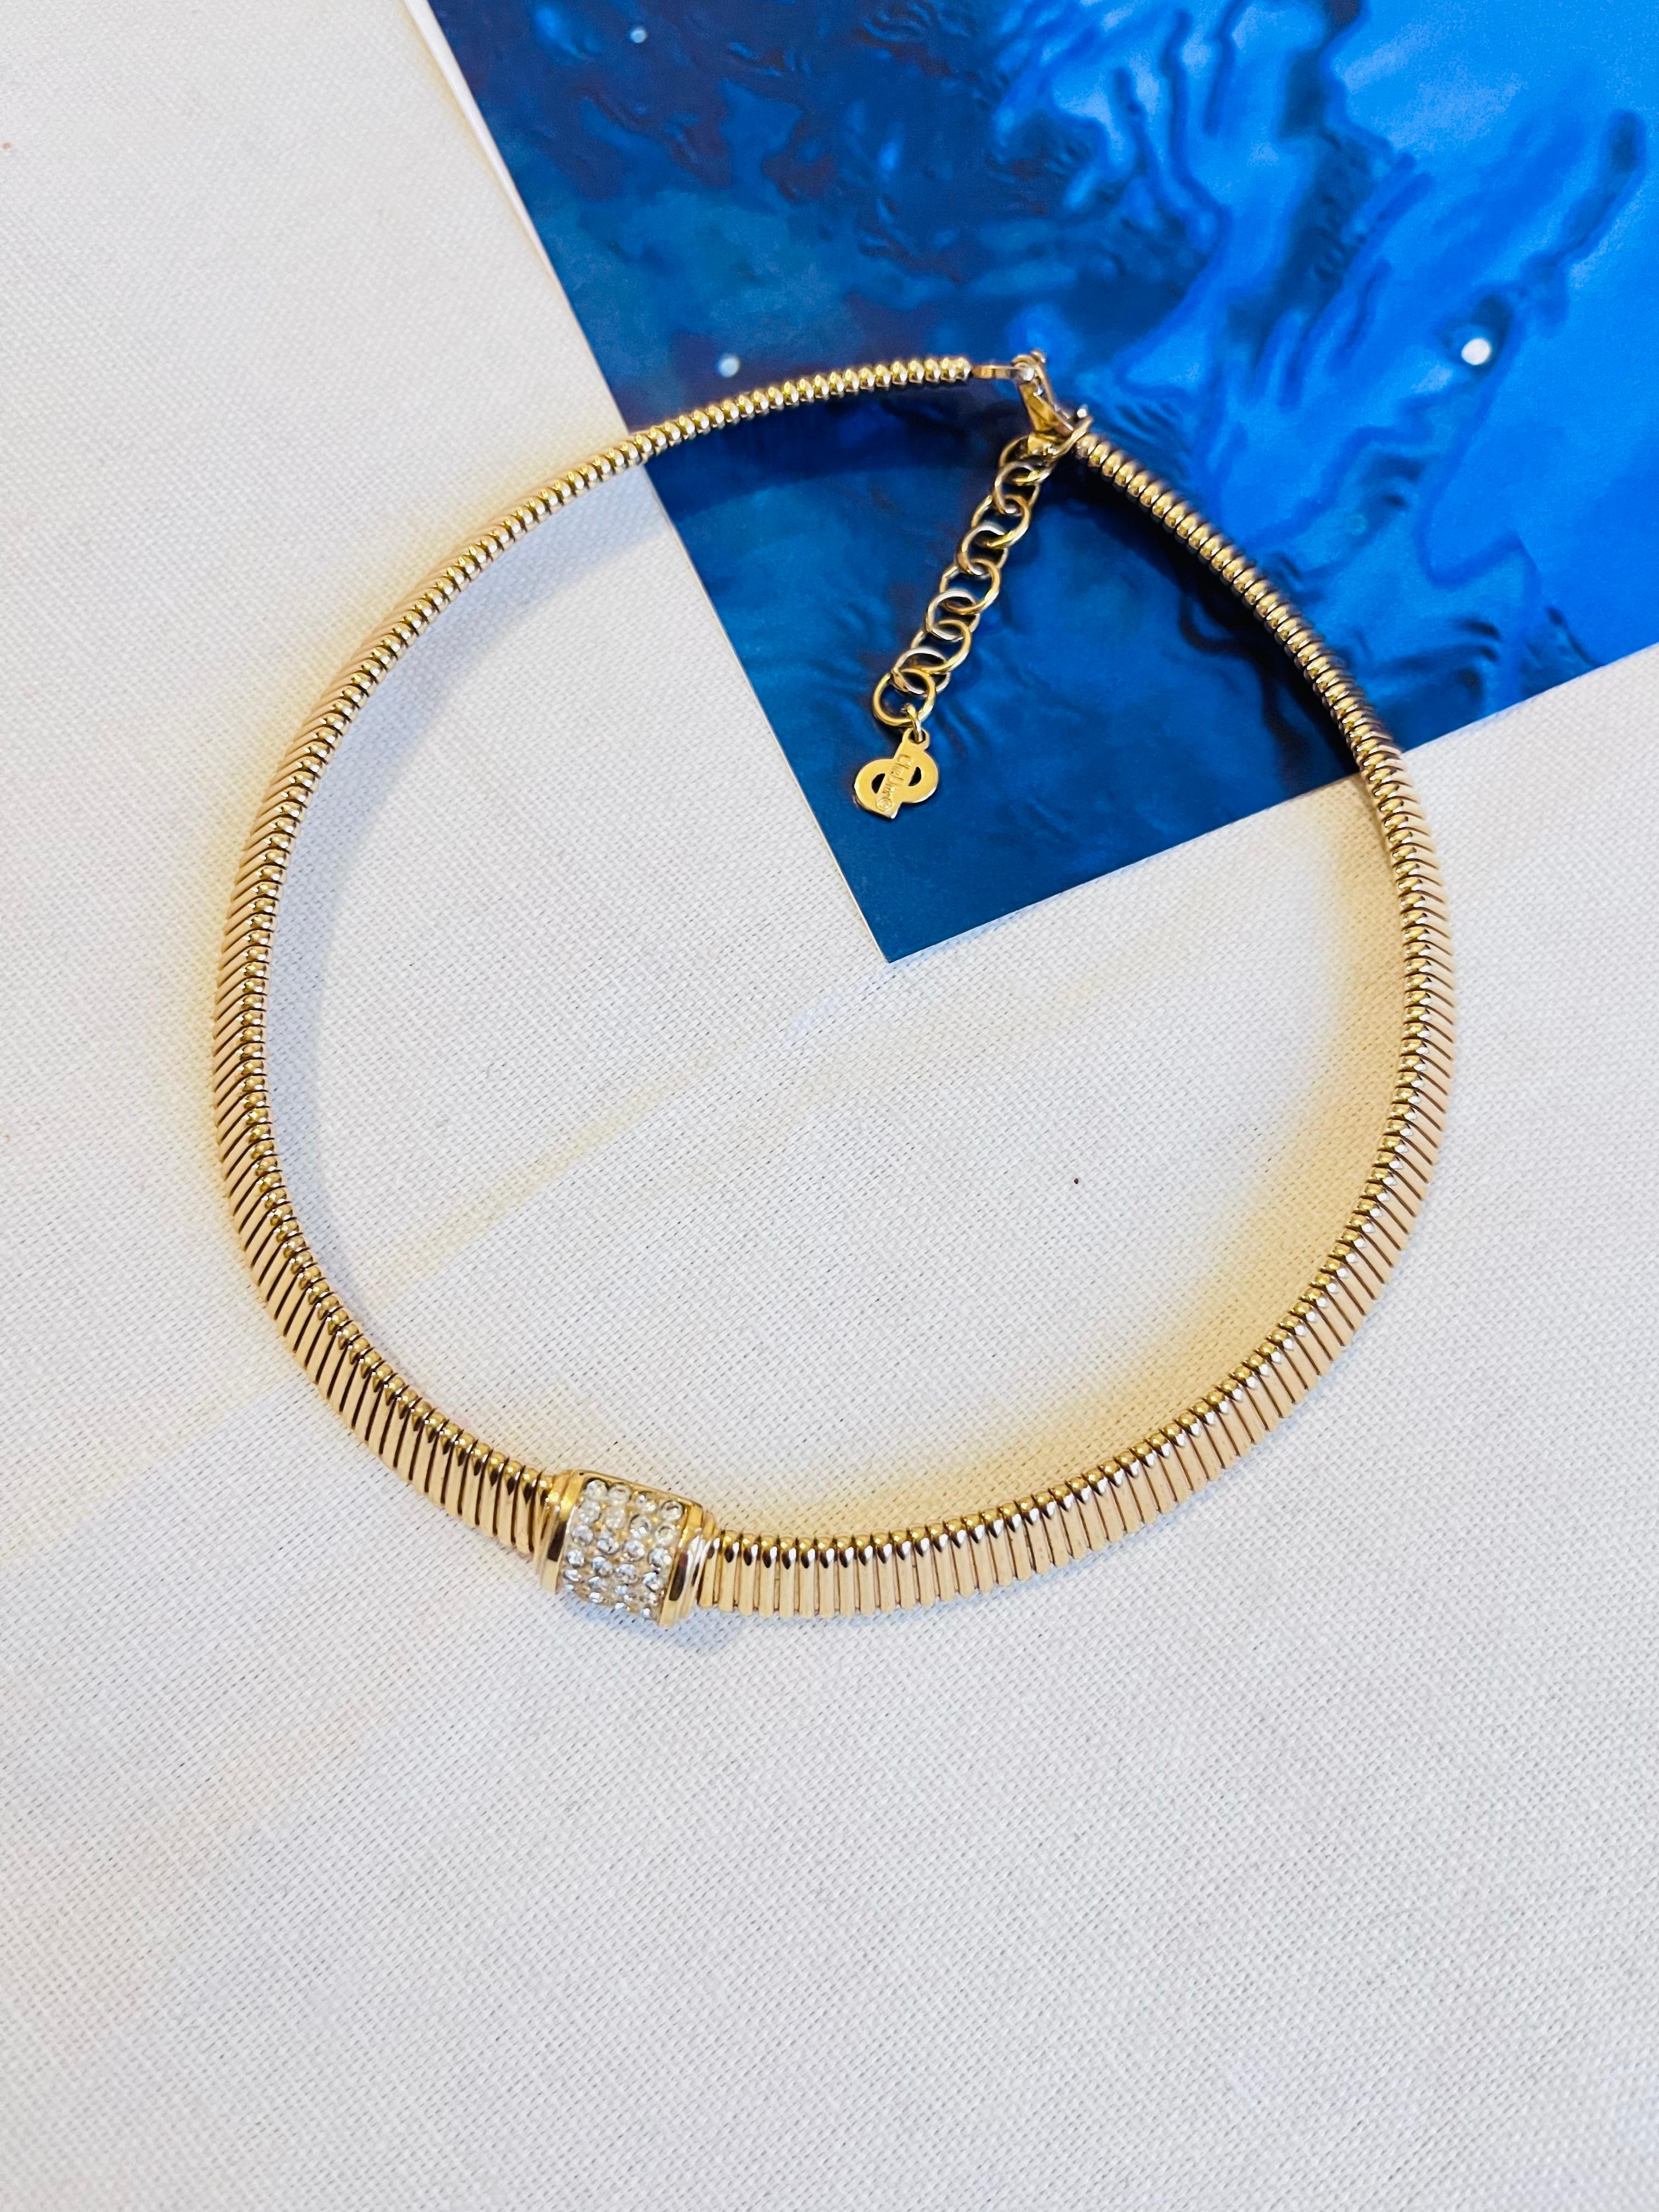 Very excellent condition. Without damage or noteworthy wear.

Marked 'Chr.Dior (C) '. 100% Genuine.

This pieces dates to the 1980s and features a broad timeless omega style collar set with a crystal embellished square motif. Chain is elastic.